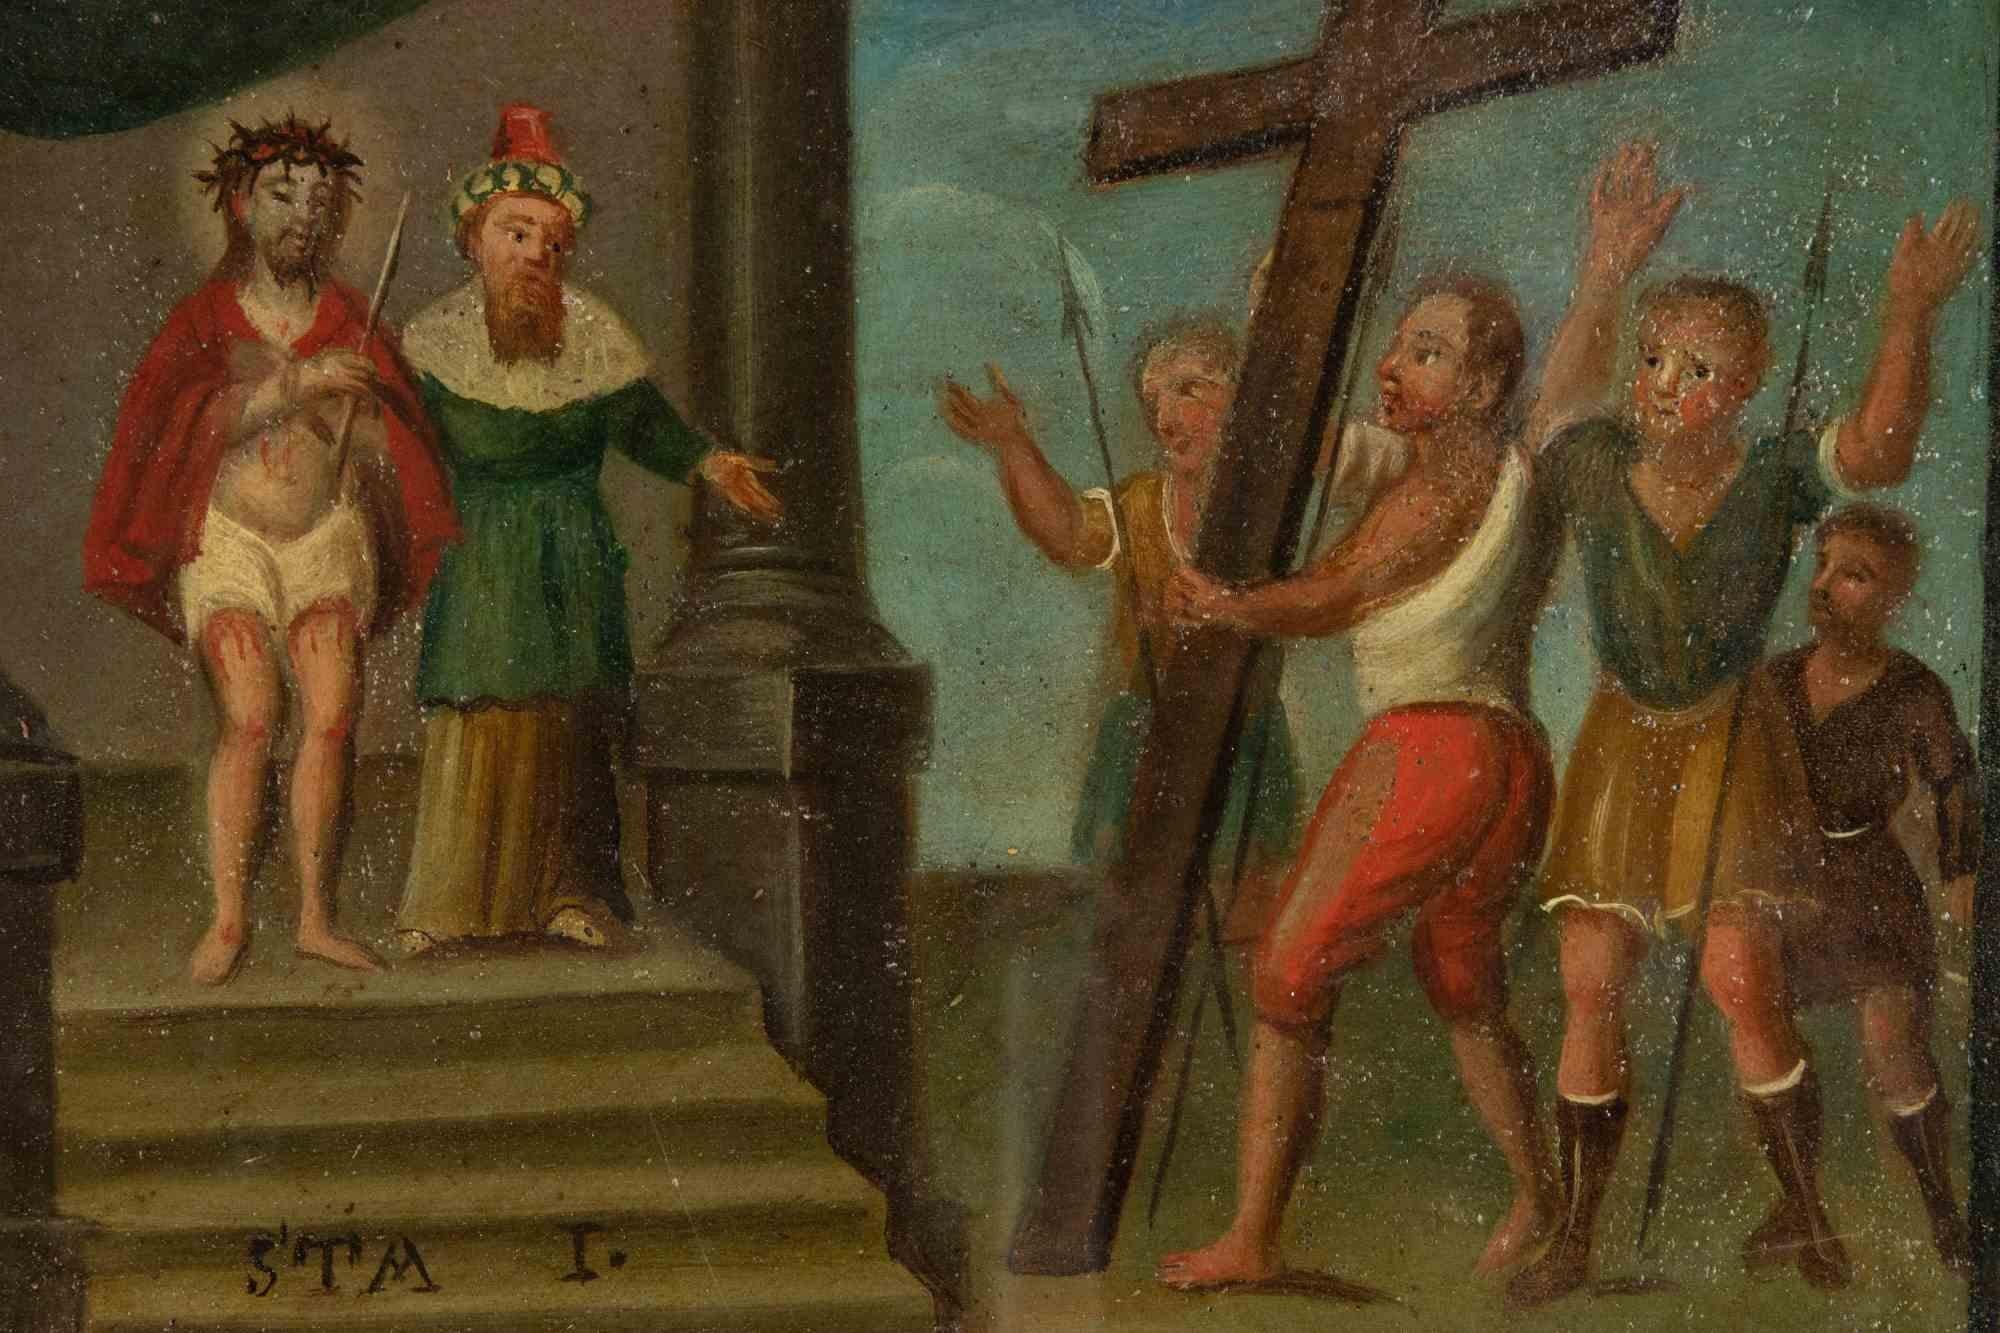 Way of the Cross - I is an original old master artwork realized in the 17th Century by Anonymous artist.

Mixed colored oil on copper.

Titled on the lower center: STA 1 (Staion 1 of Via Crucis)

The artwork represents a scene from the Way of the